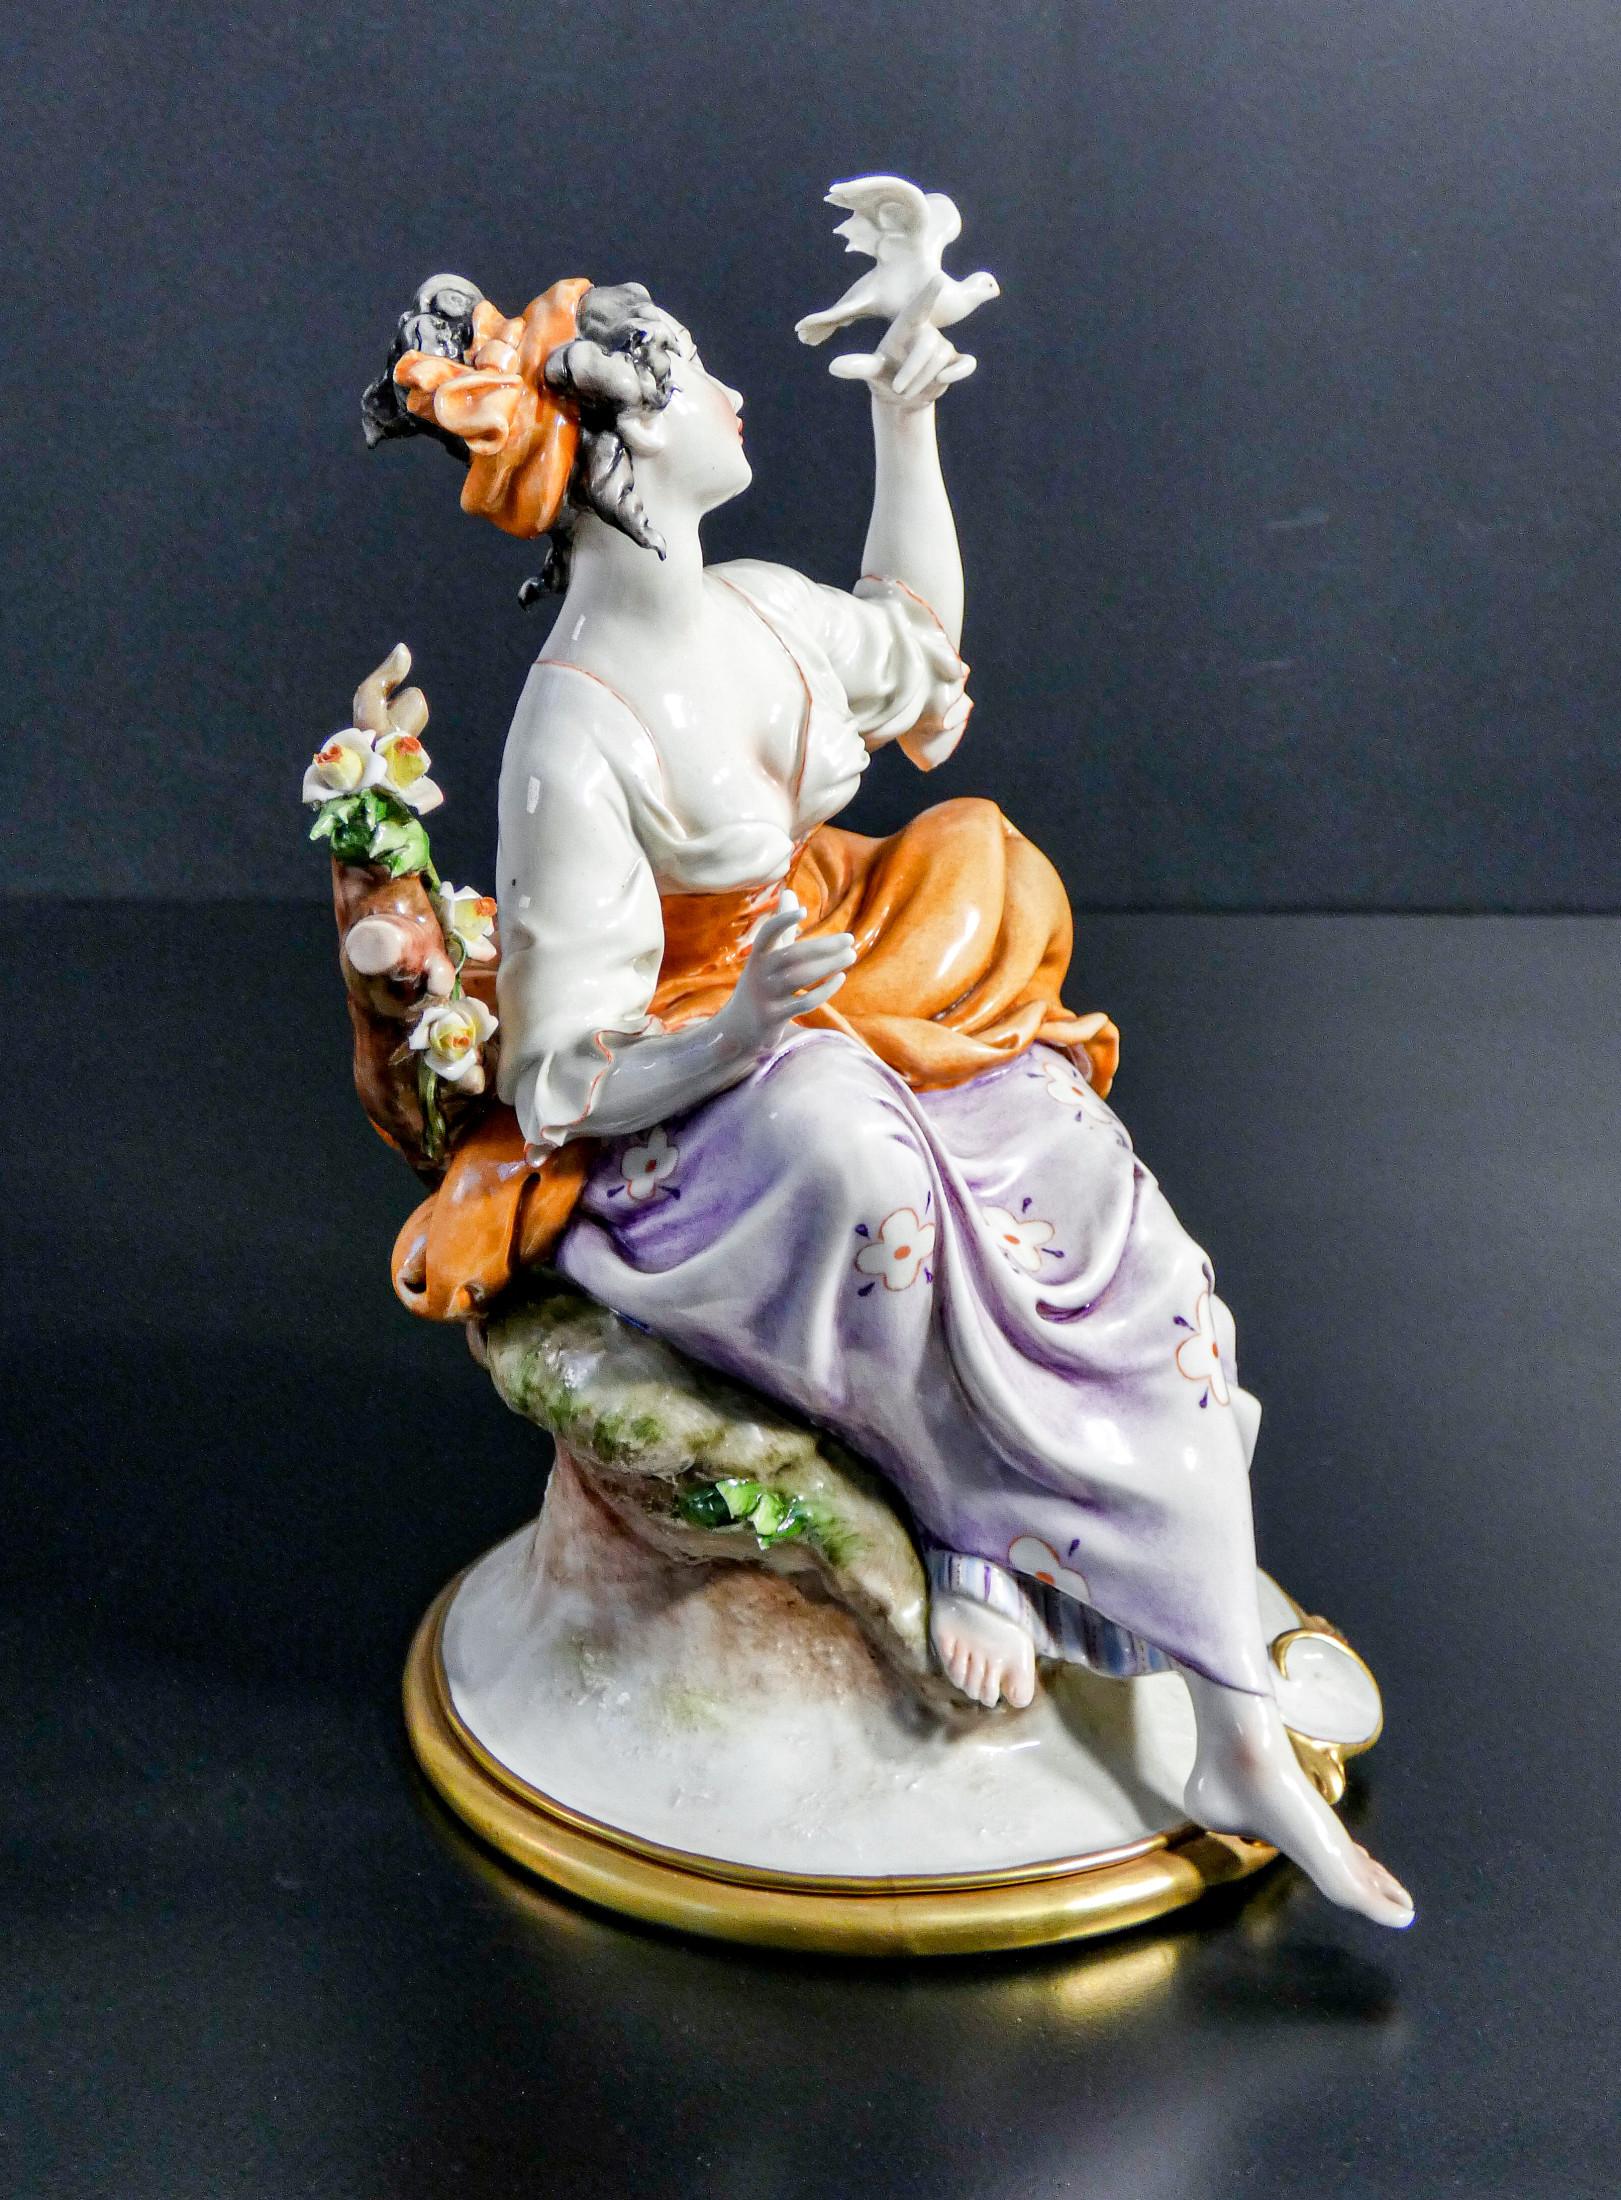 20th Century Pair of Hand Painted Porcelain Sculptures, Signed Giuseppe CAPPÉ, Contadini